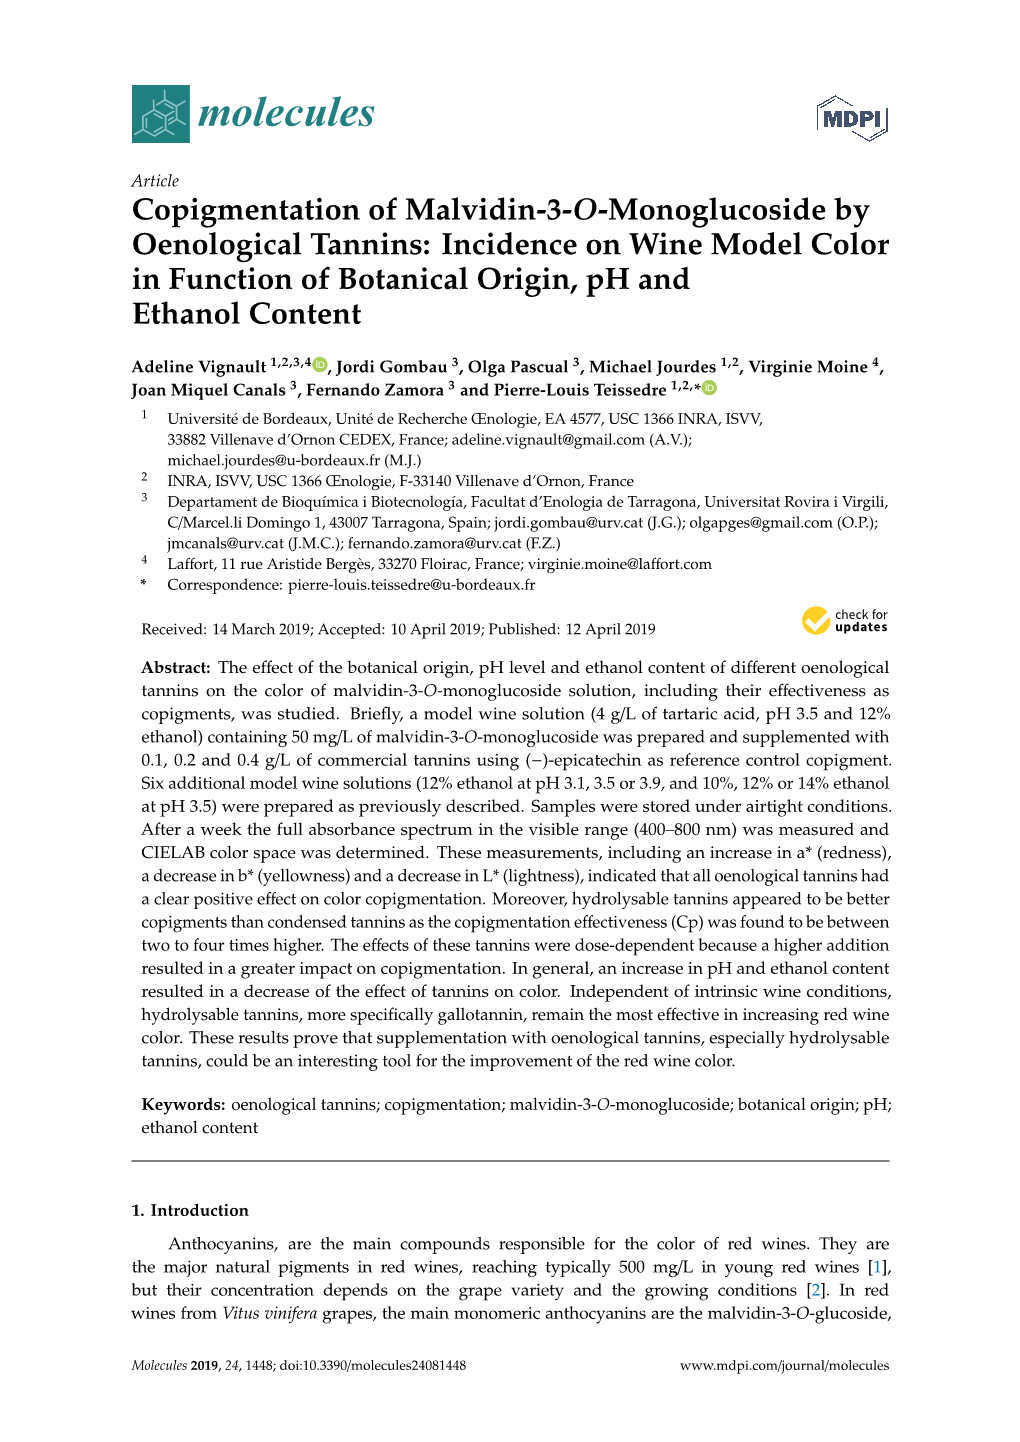 Copigmentation of Malvidin-3-O-Monoglucoside by Oenological Tannins: Incidence on Wine Model Color in Function of Botanical Origin, Ph and Ethanol Content